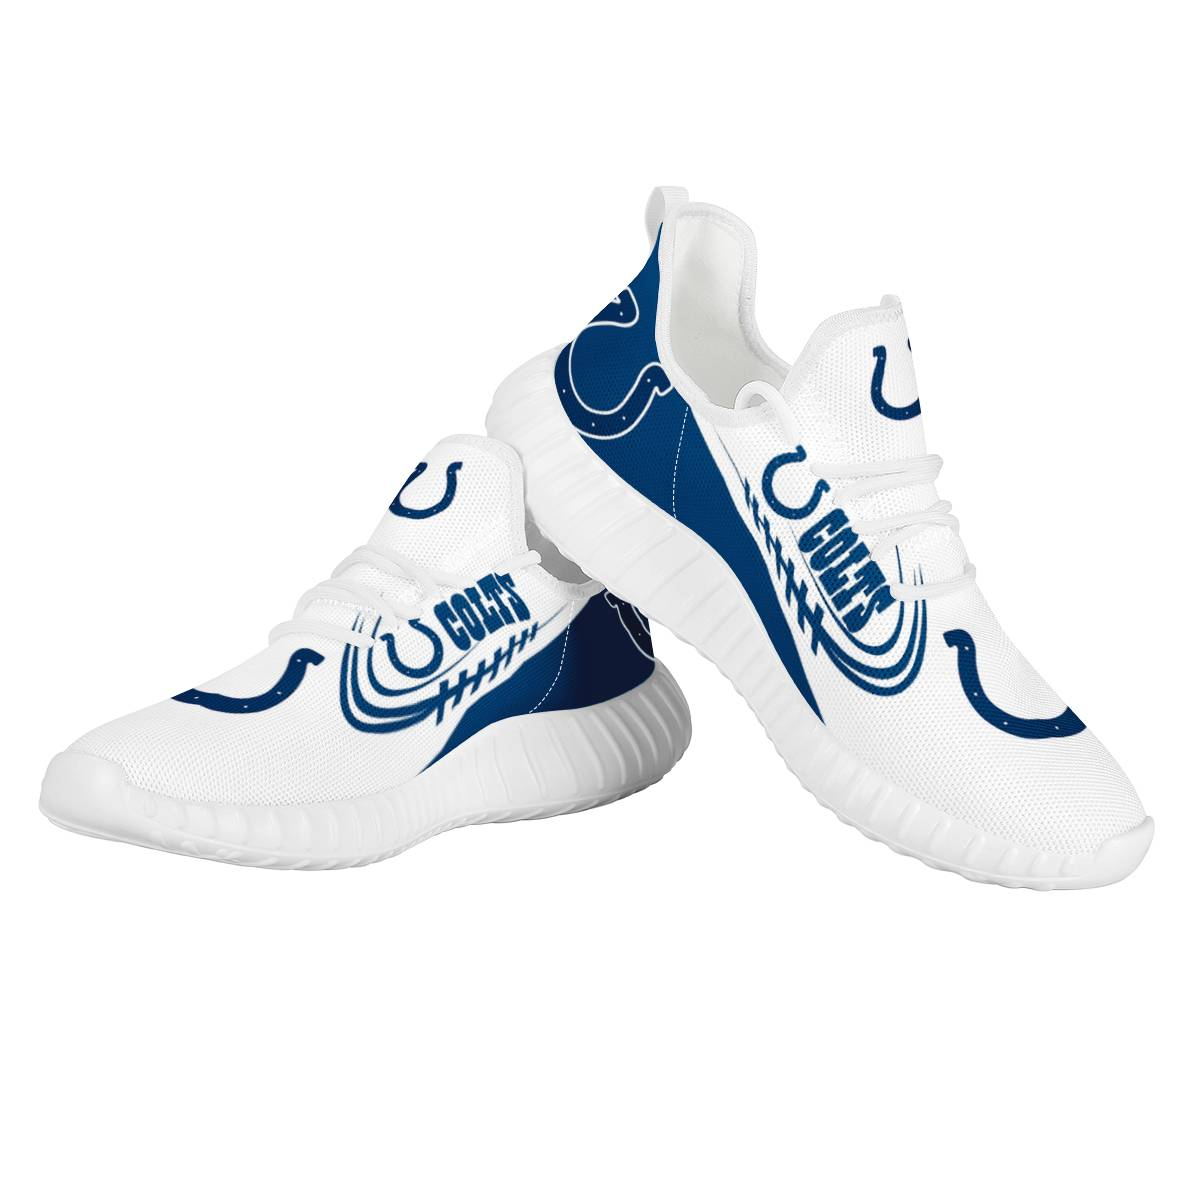 Women's Indianapolis Colts Mesh Knit Sneakers/Shoes 007